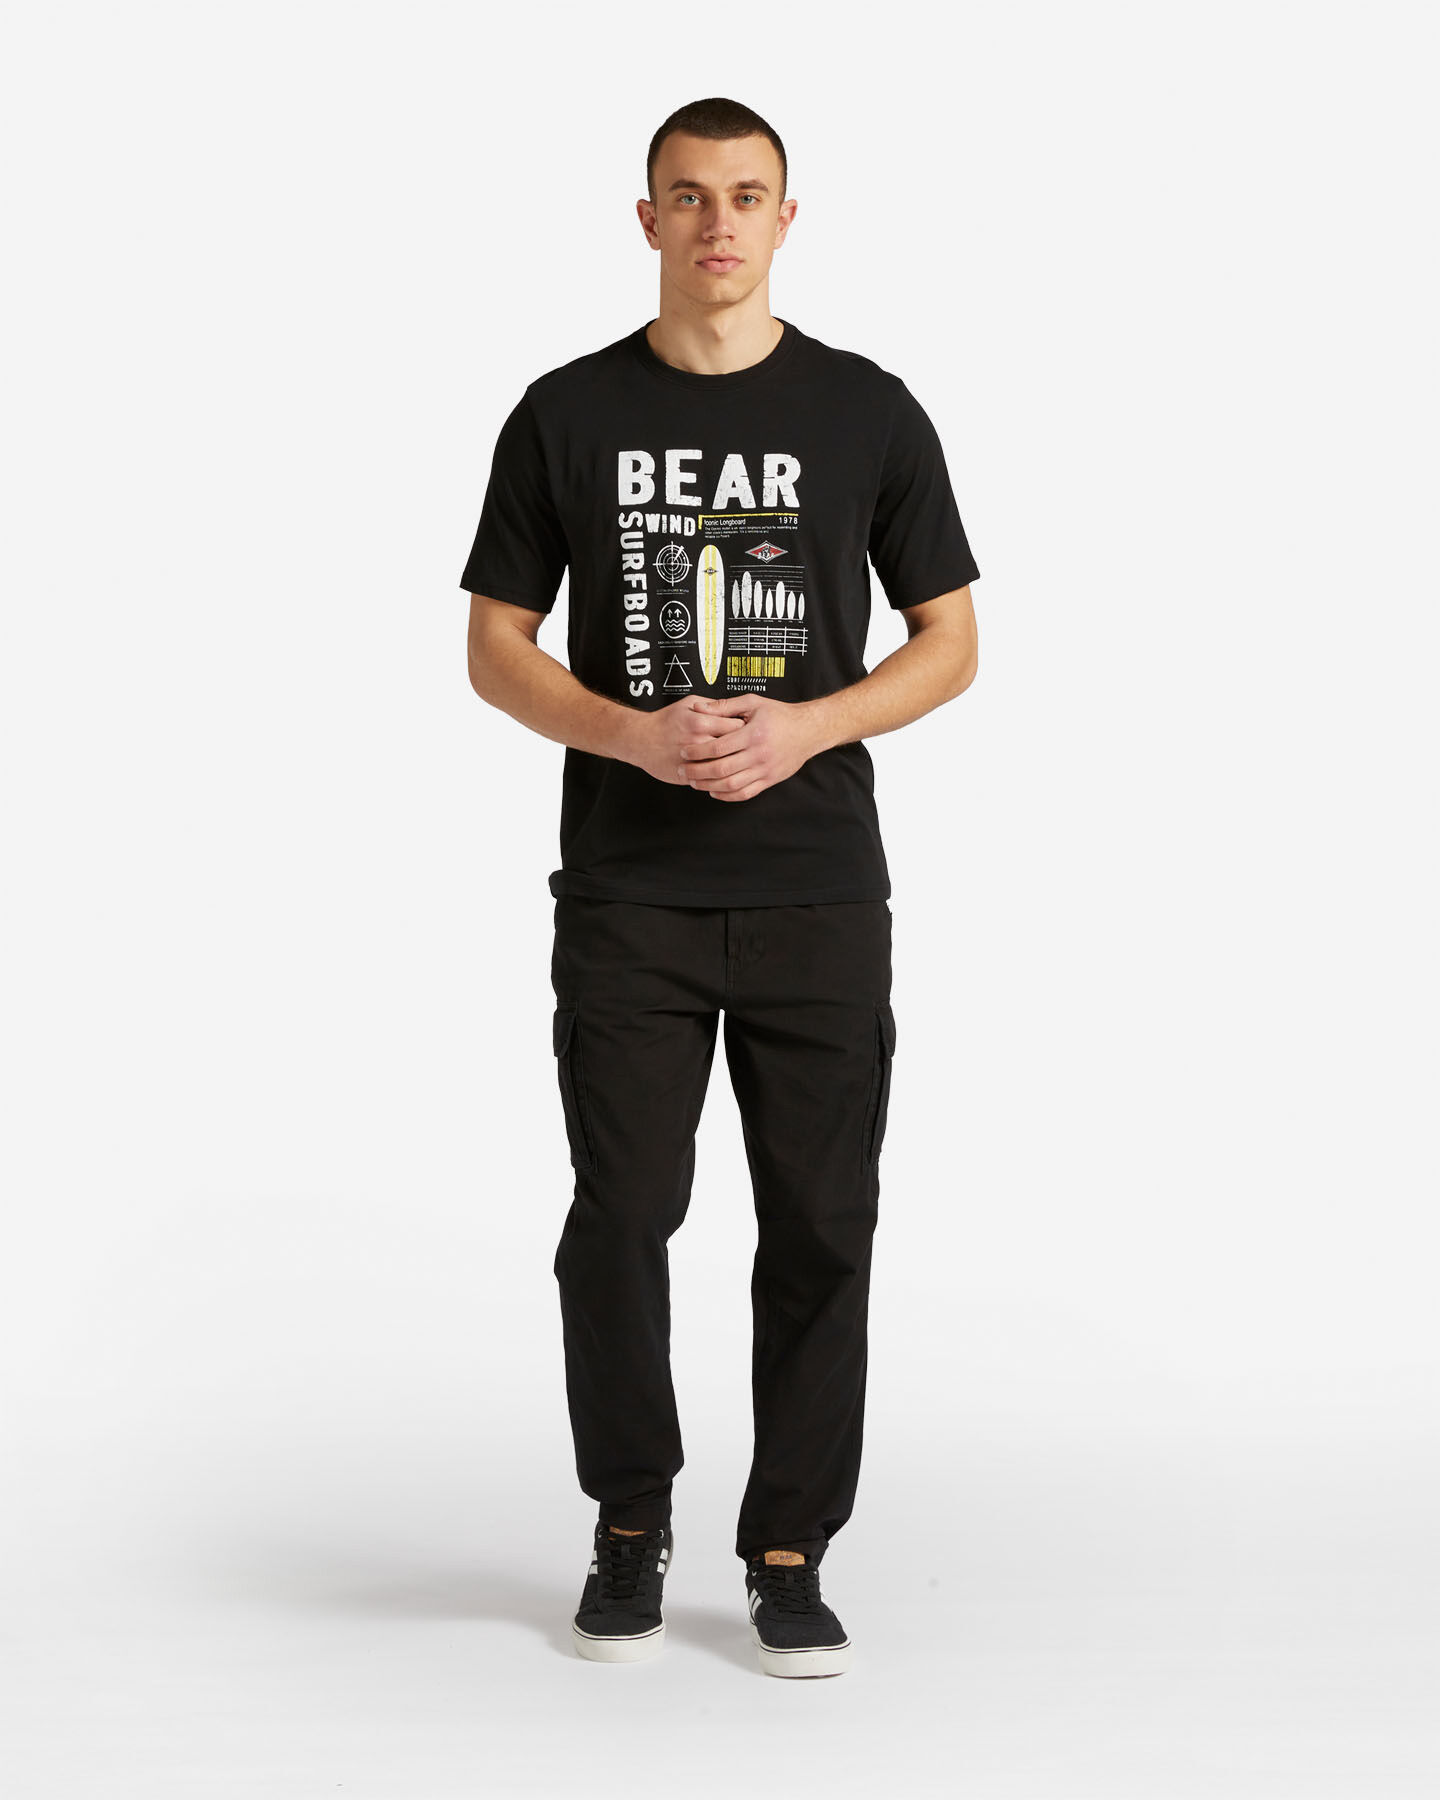  T-Shirt BEAR HERITAGE M S4131632|050|S scatto 1